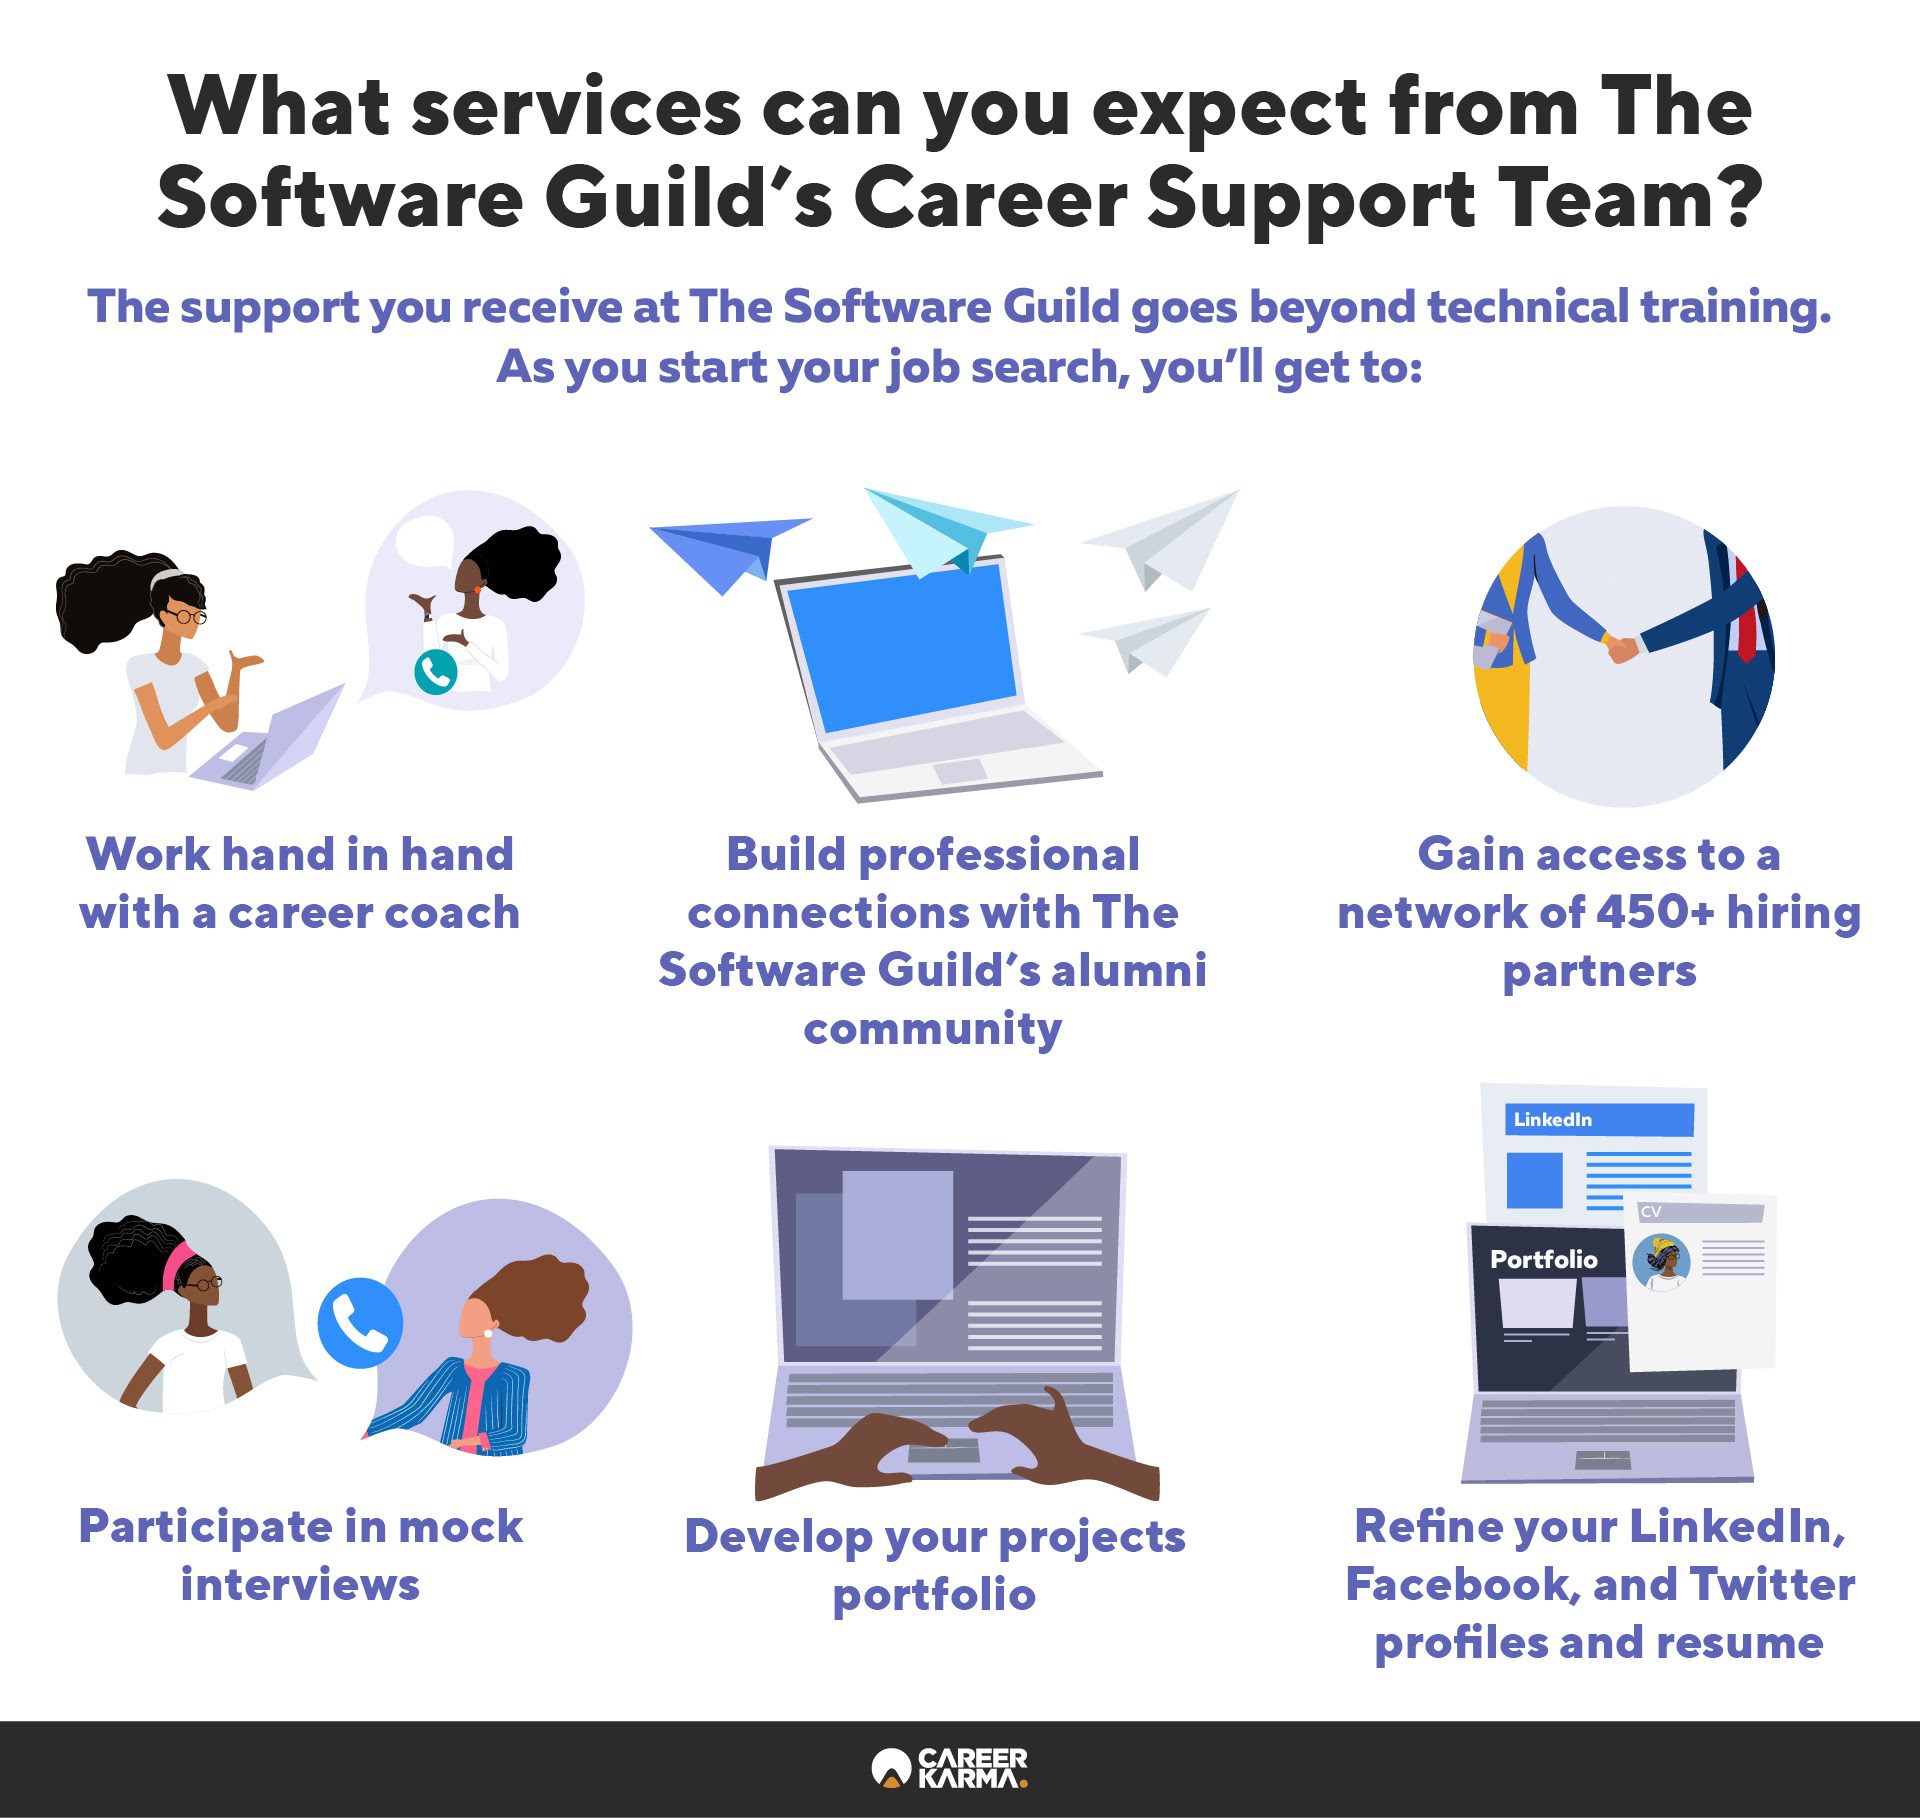 An infographic covering the career services offered by The Software Guild